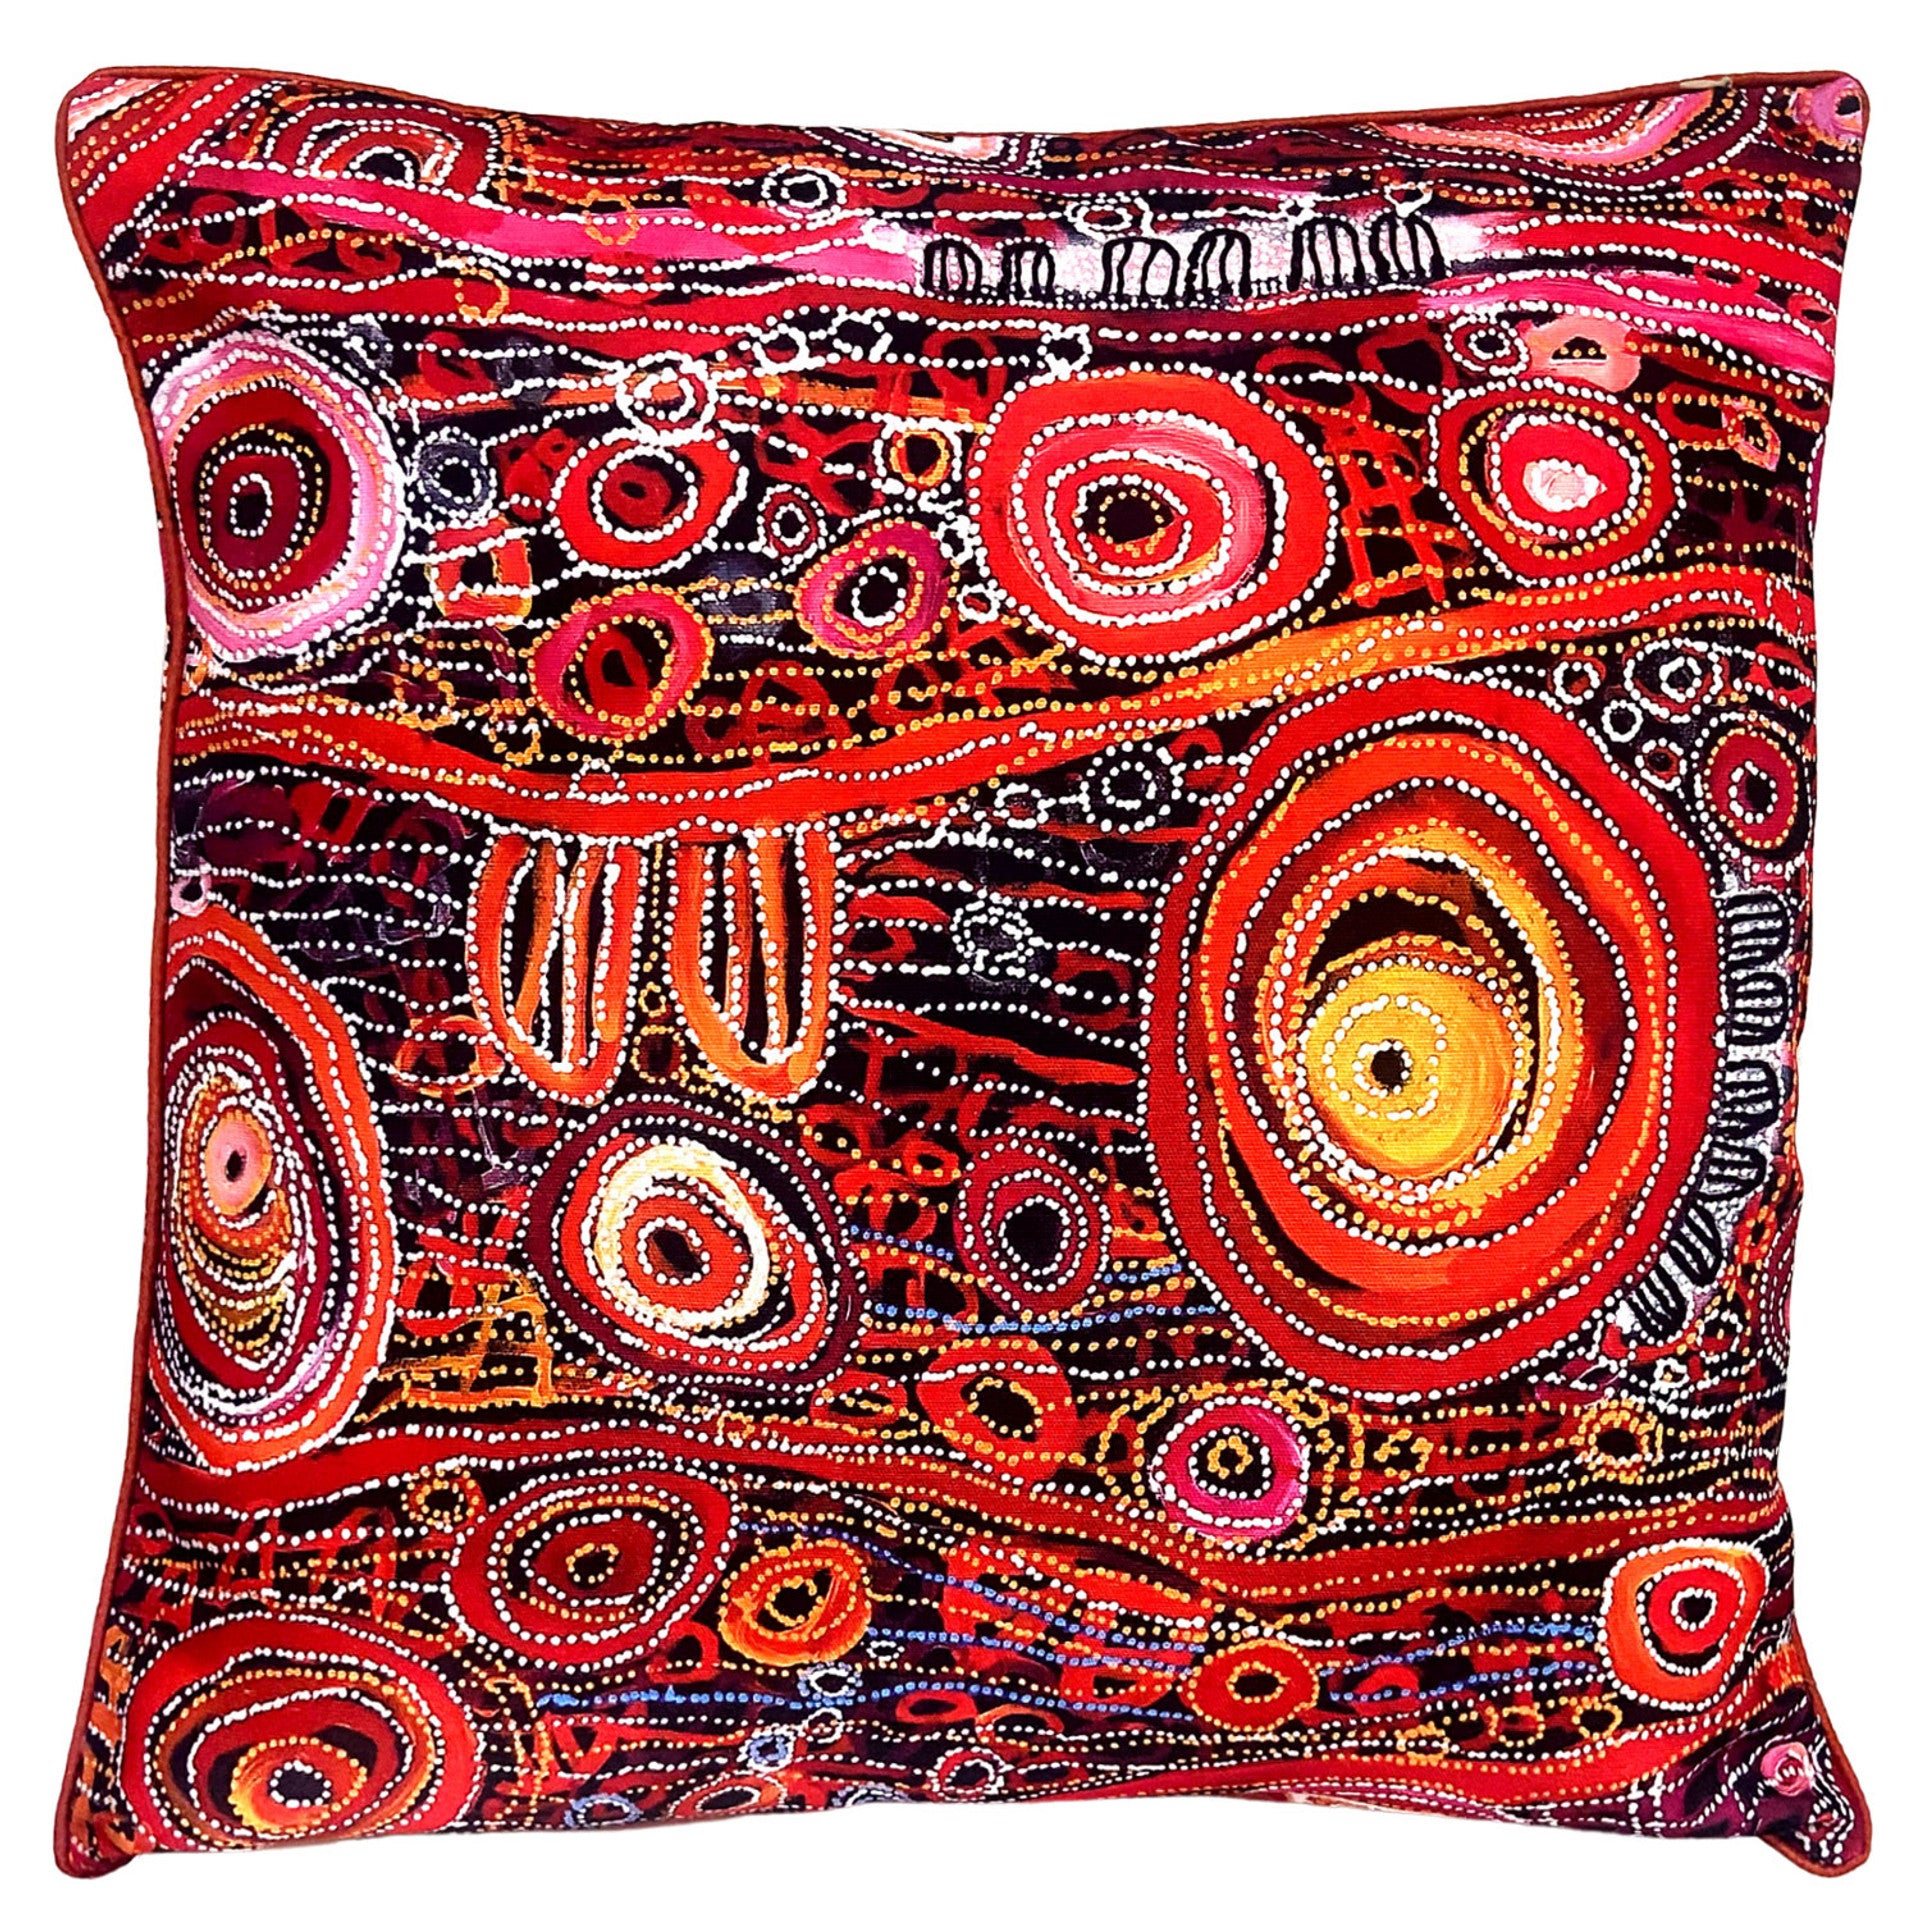 Outdoor Cushion Cover - Charmaine Pwerle - Red